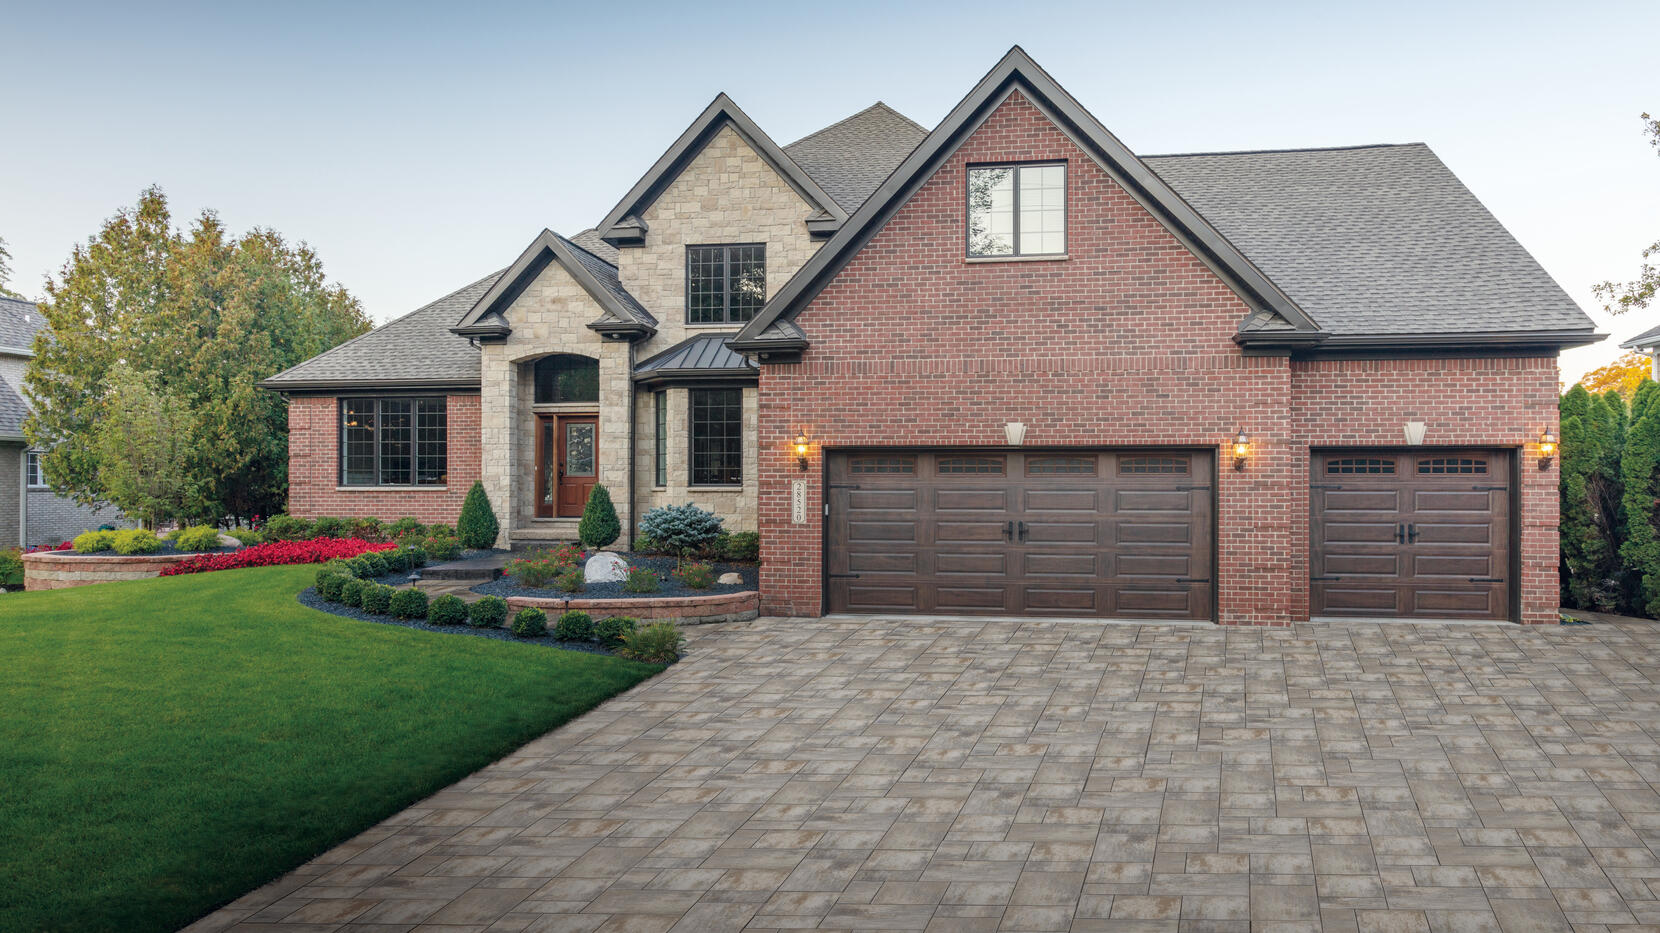 Nueva Paver, Champagne (paver) Crossroads, Crawford (brick) with Vivace, Lakeshore (stone)